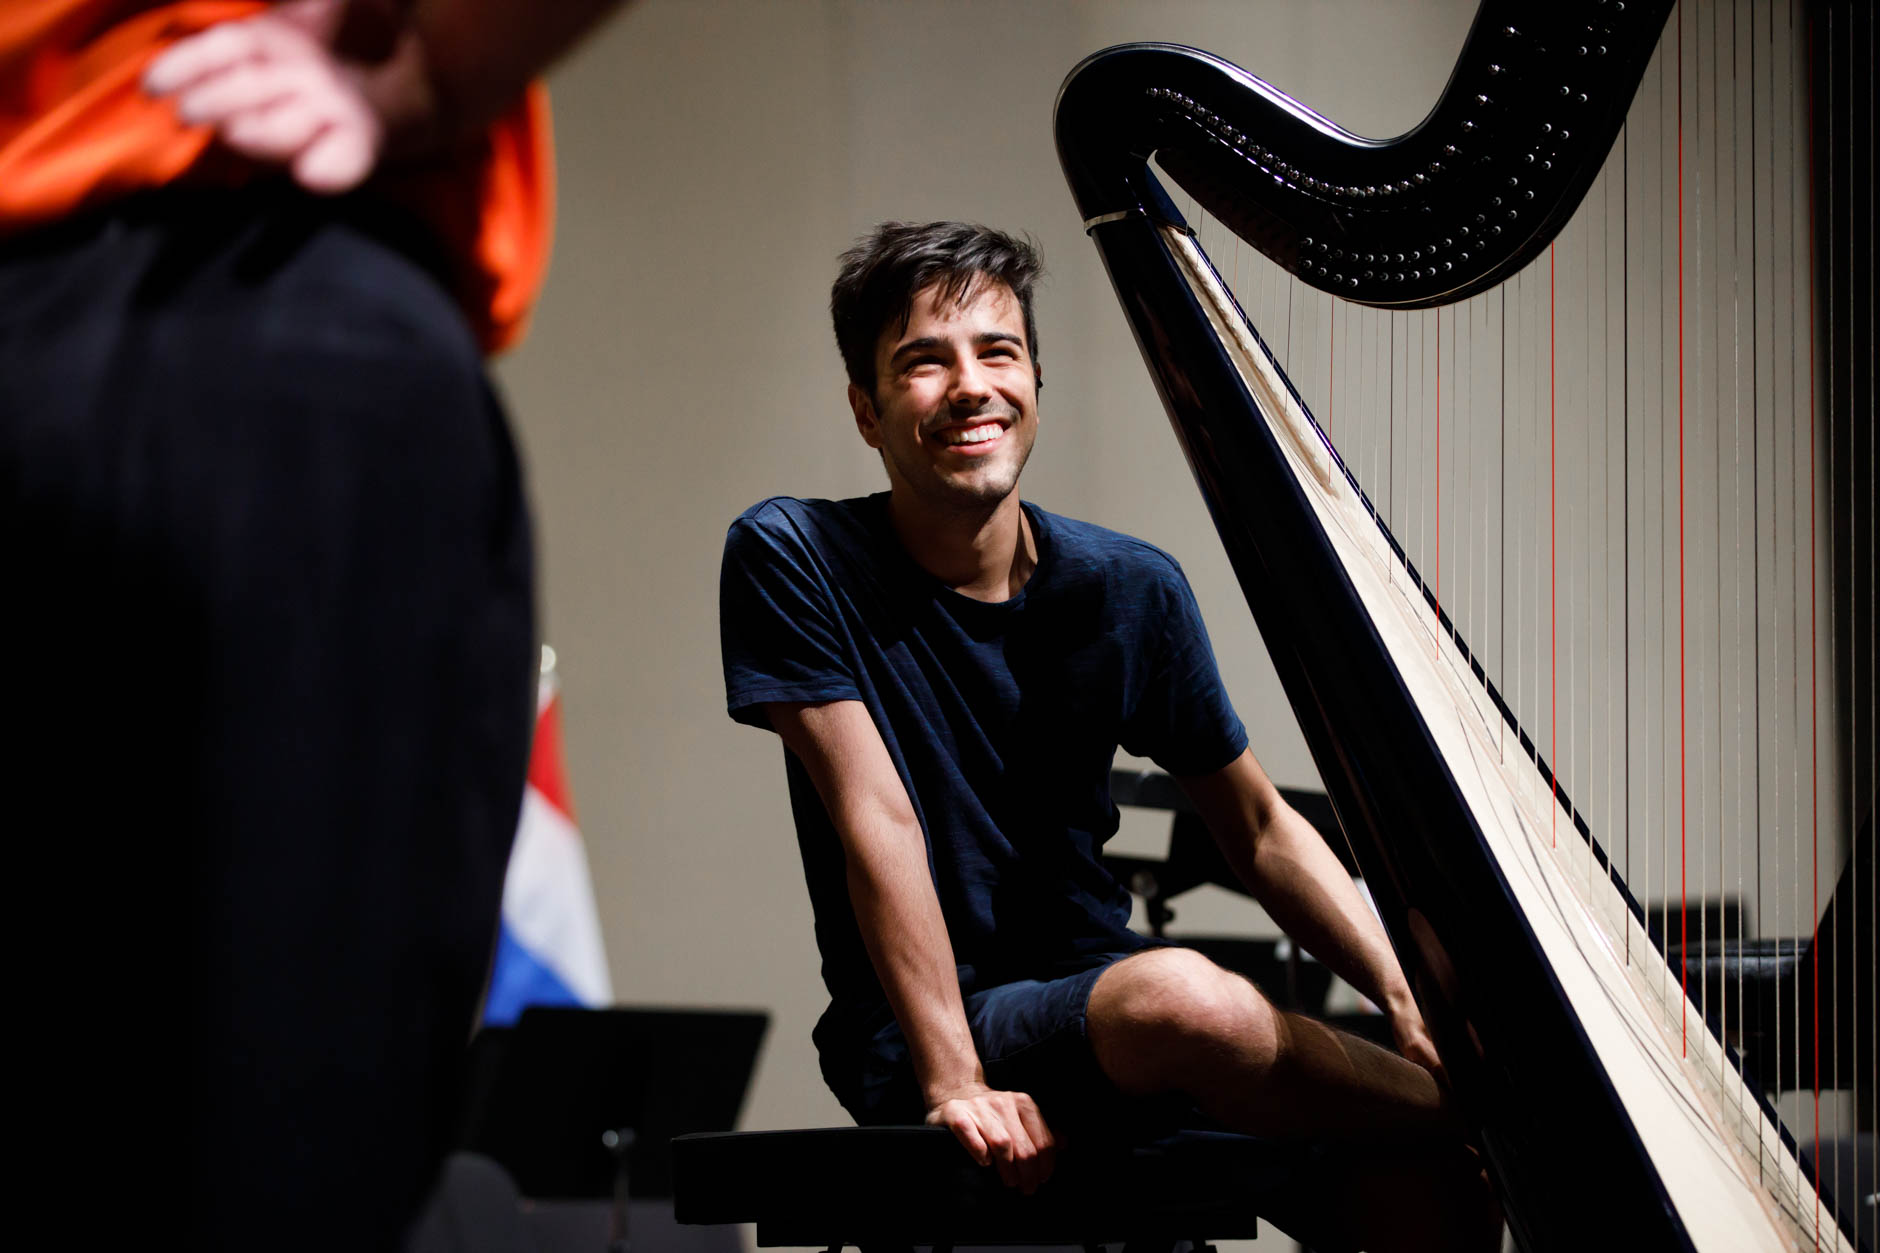 Valerio Lisci from Italy shares a laugh before an orchestra rehearsal for the Final Stage concert at the 11th USA International Harp Competition at Indiana University in Bloomington, Indiana on Friday, July 12, 2019. (Photo by James Brosher)